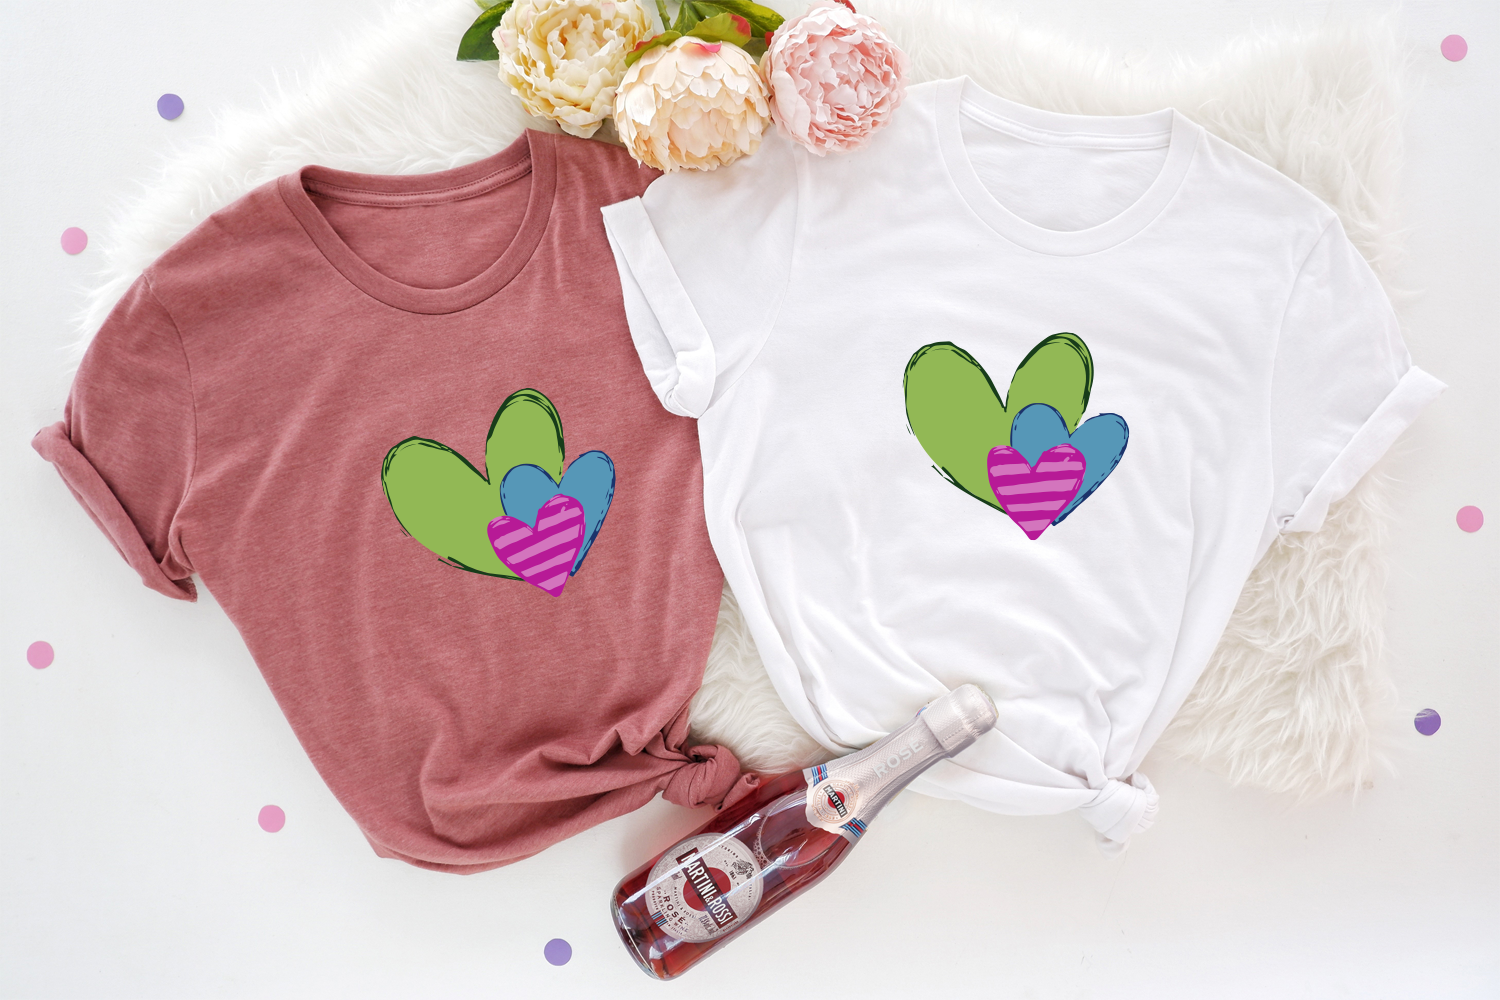 Celebrate love and affection with this unique and eye-catching Valentine's Day shirt.